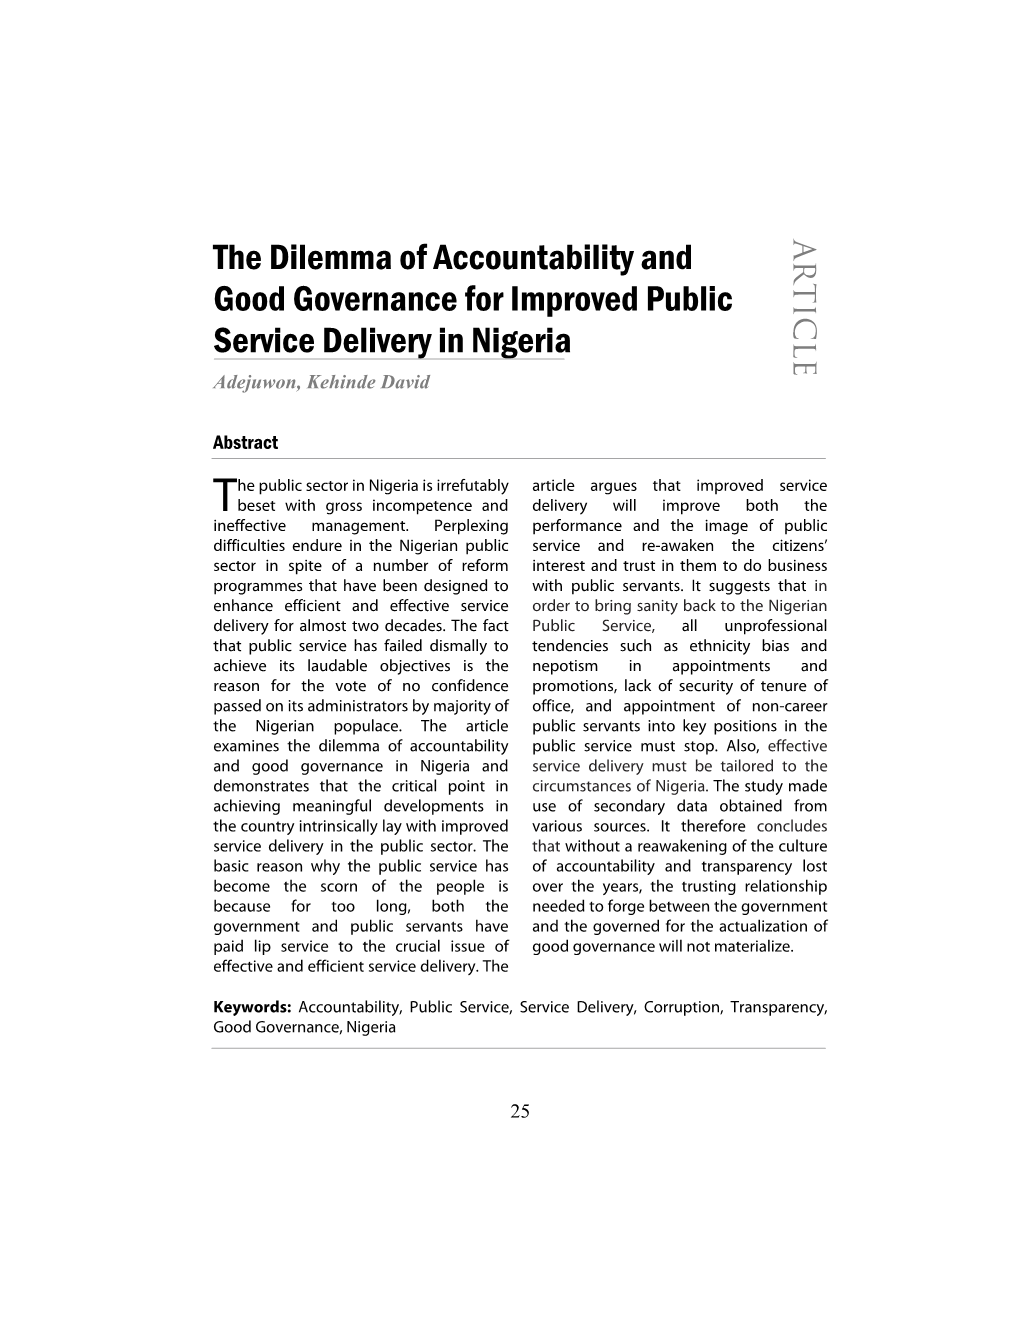 The Dilemma of Accountability and Good Governance for Improved Public Service Delivery in Nigeria